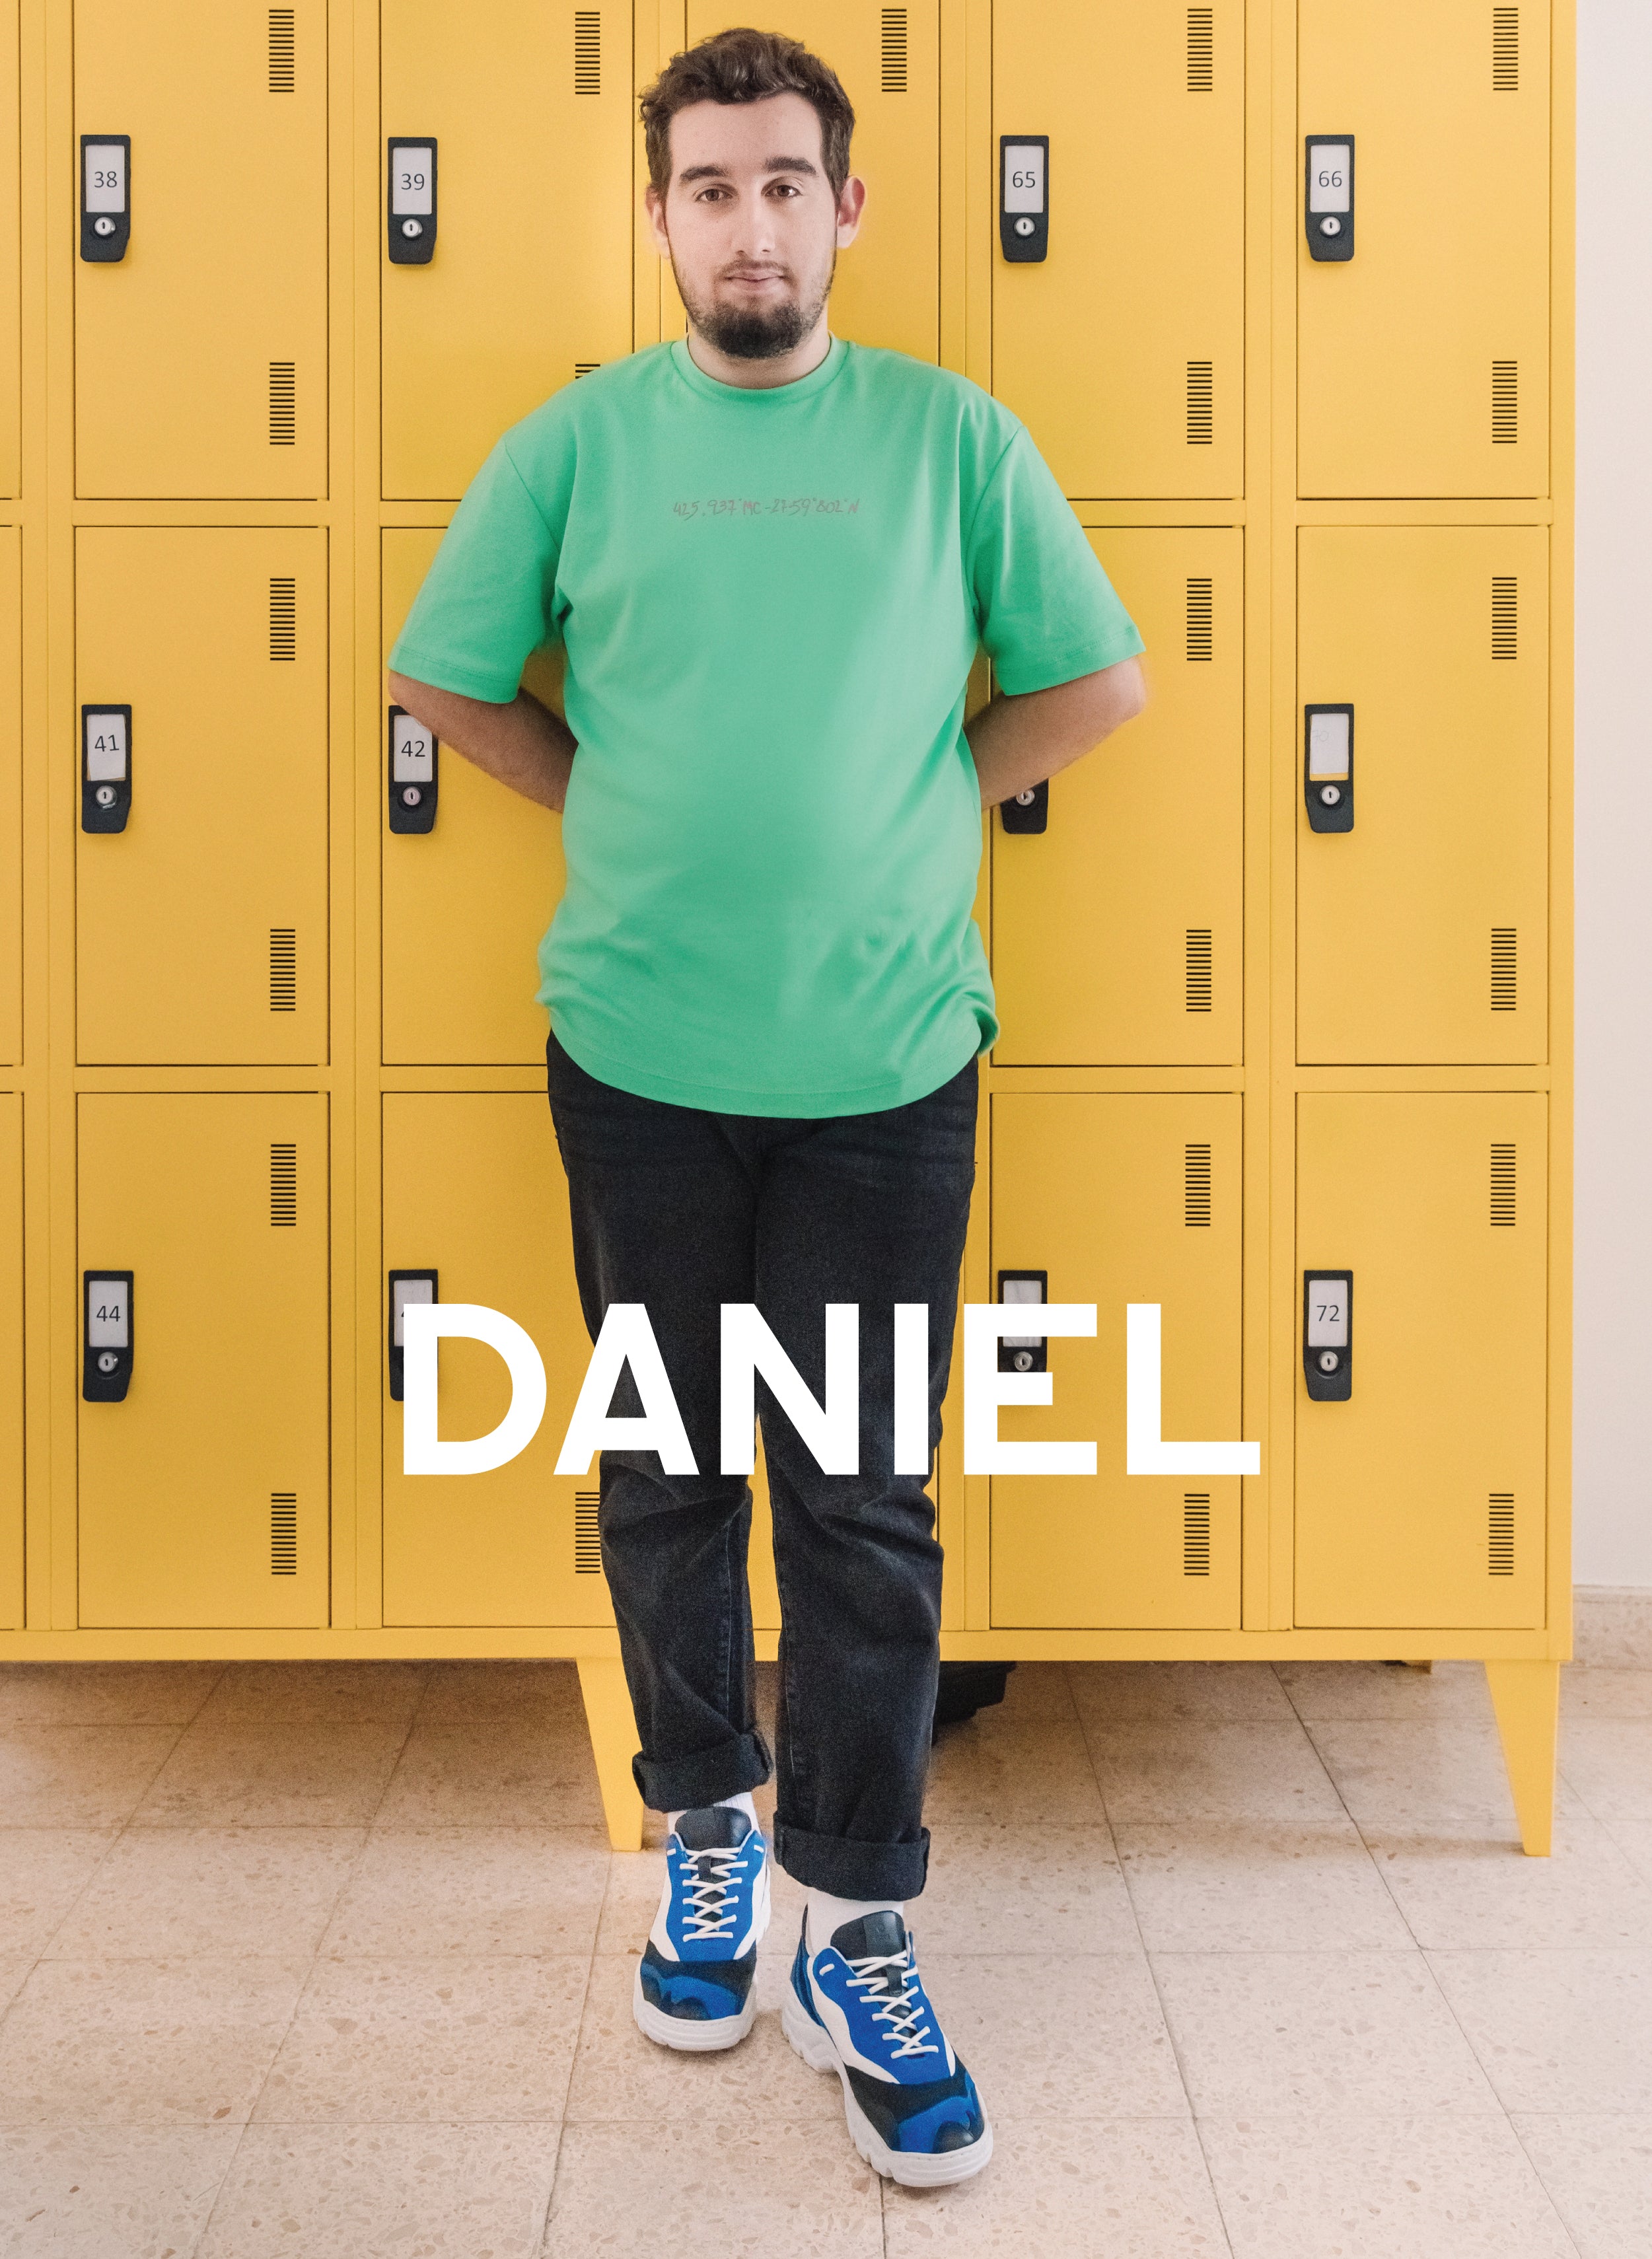 Daniel leaning against a yellow locker, wearing Diverge sneakers, promoting social impact and custom shoes throught the imagine project. 